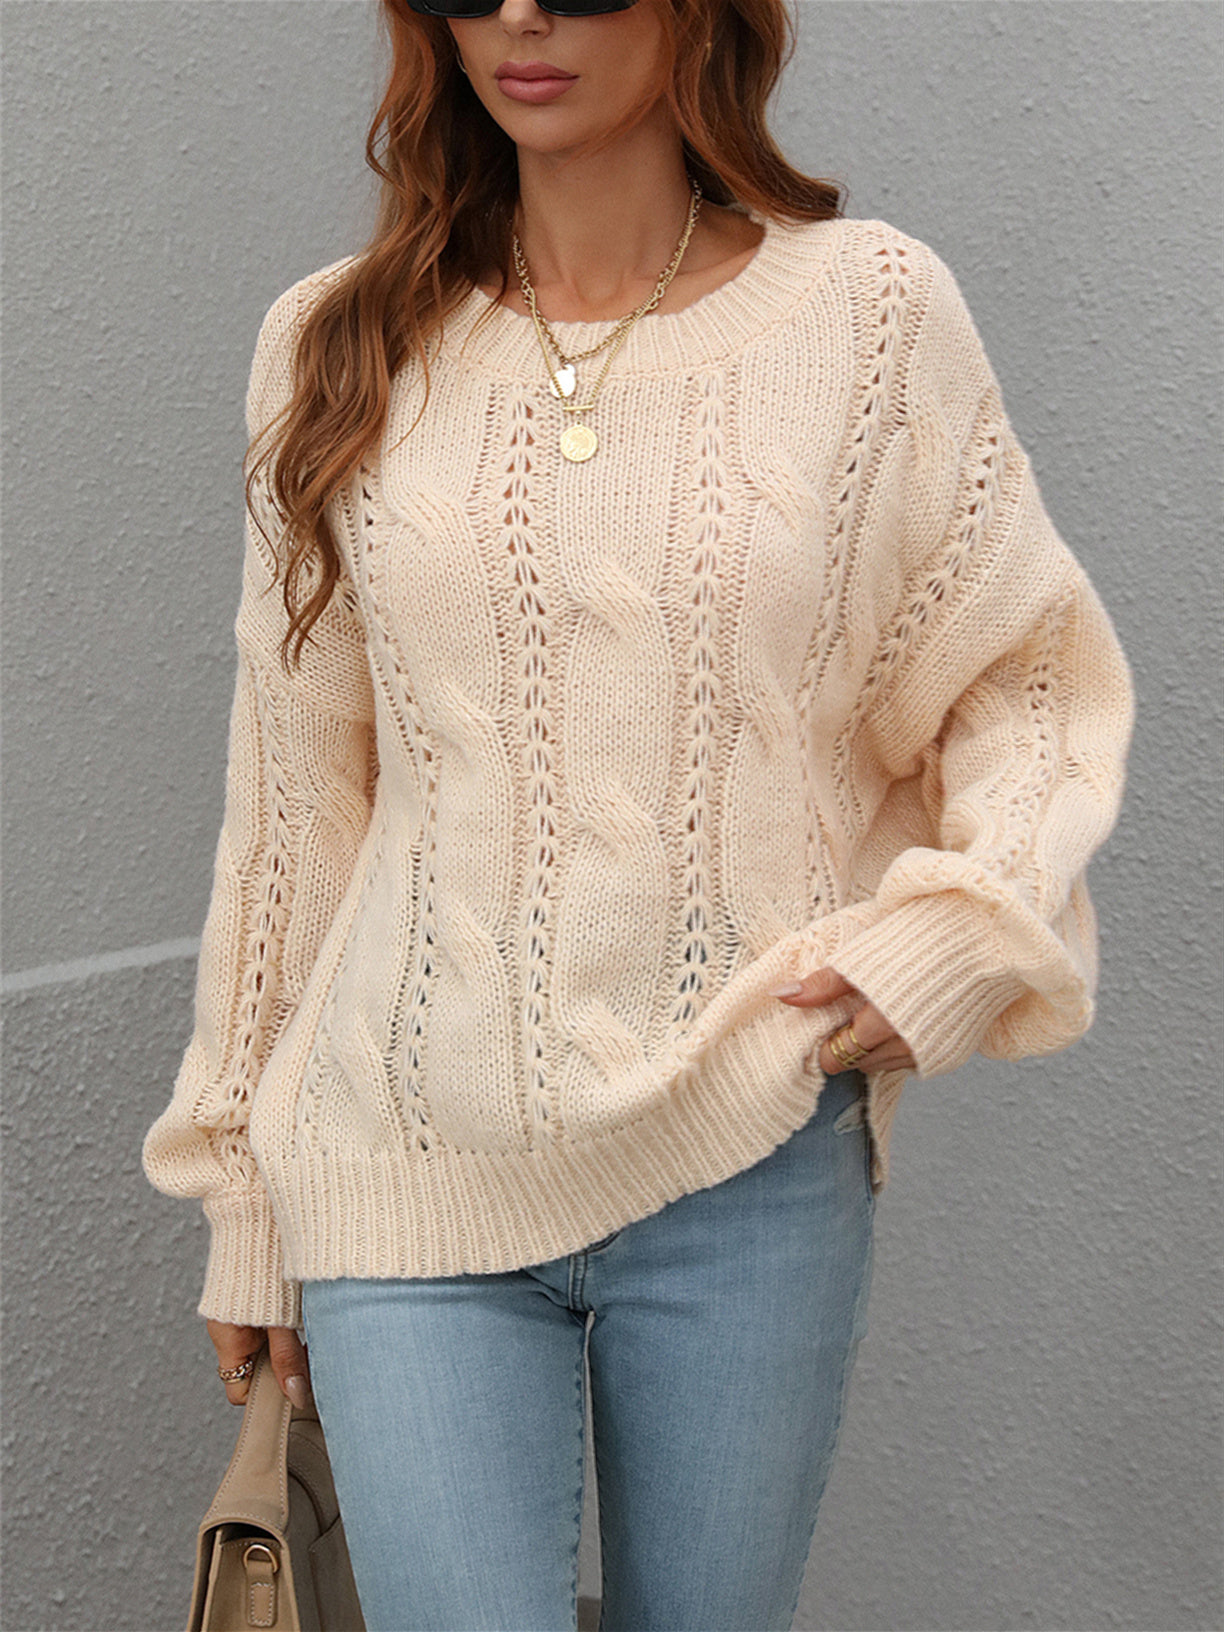 Women's Long Sleeve Scoop Neck Solid Color Top Knit Sweater